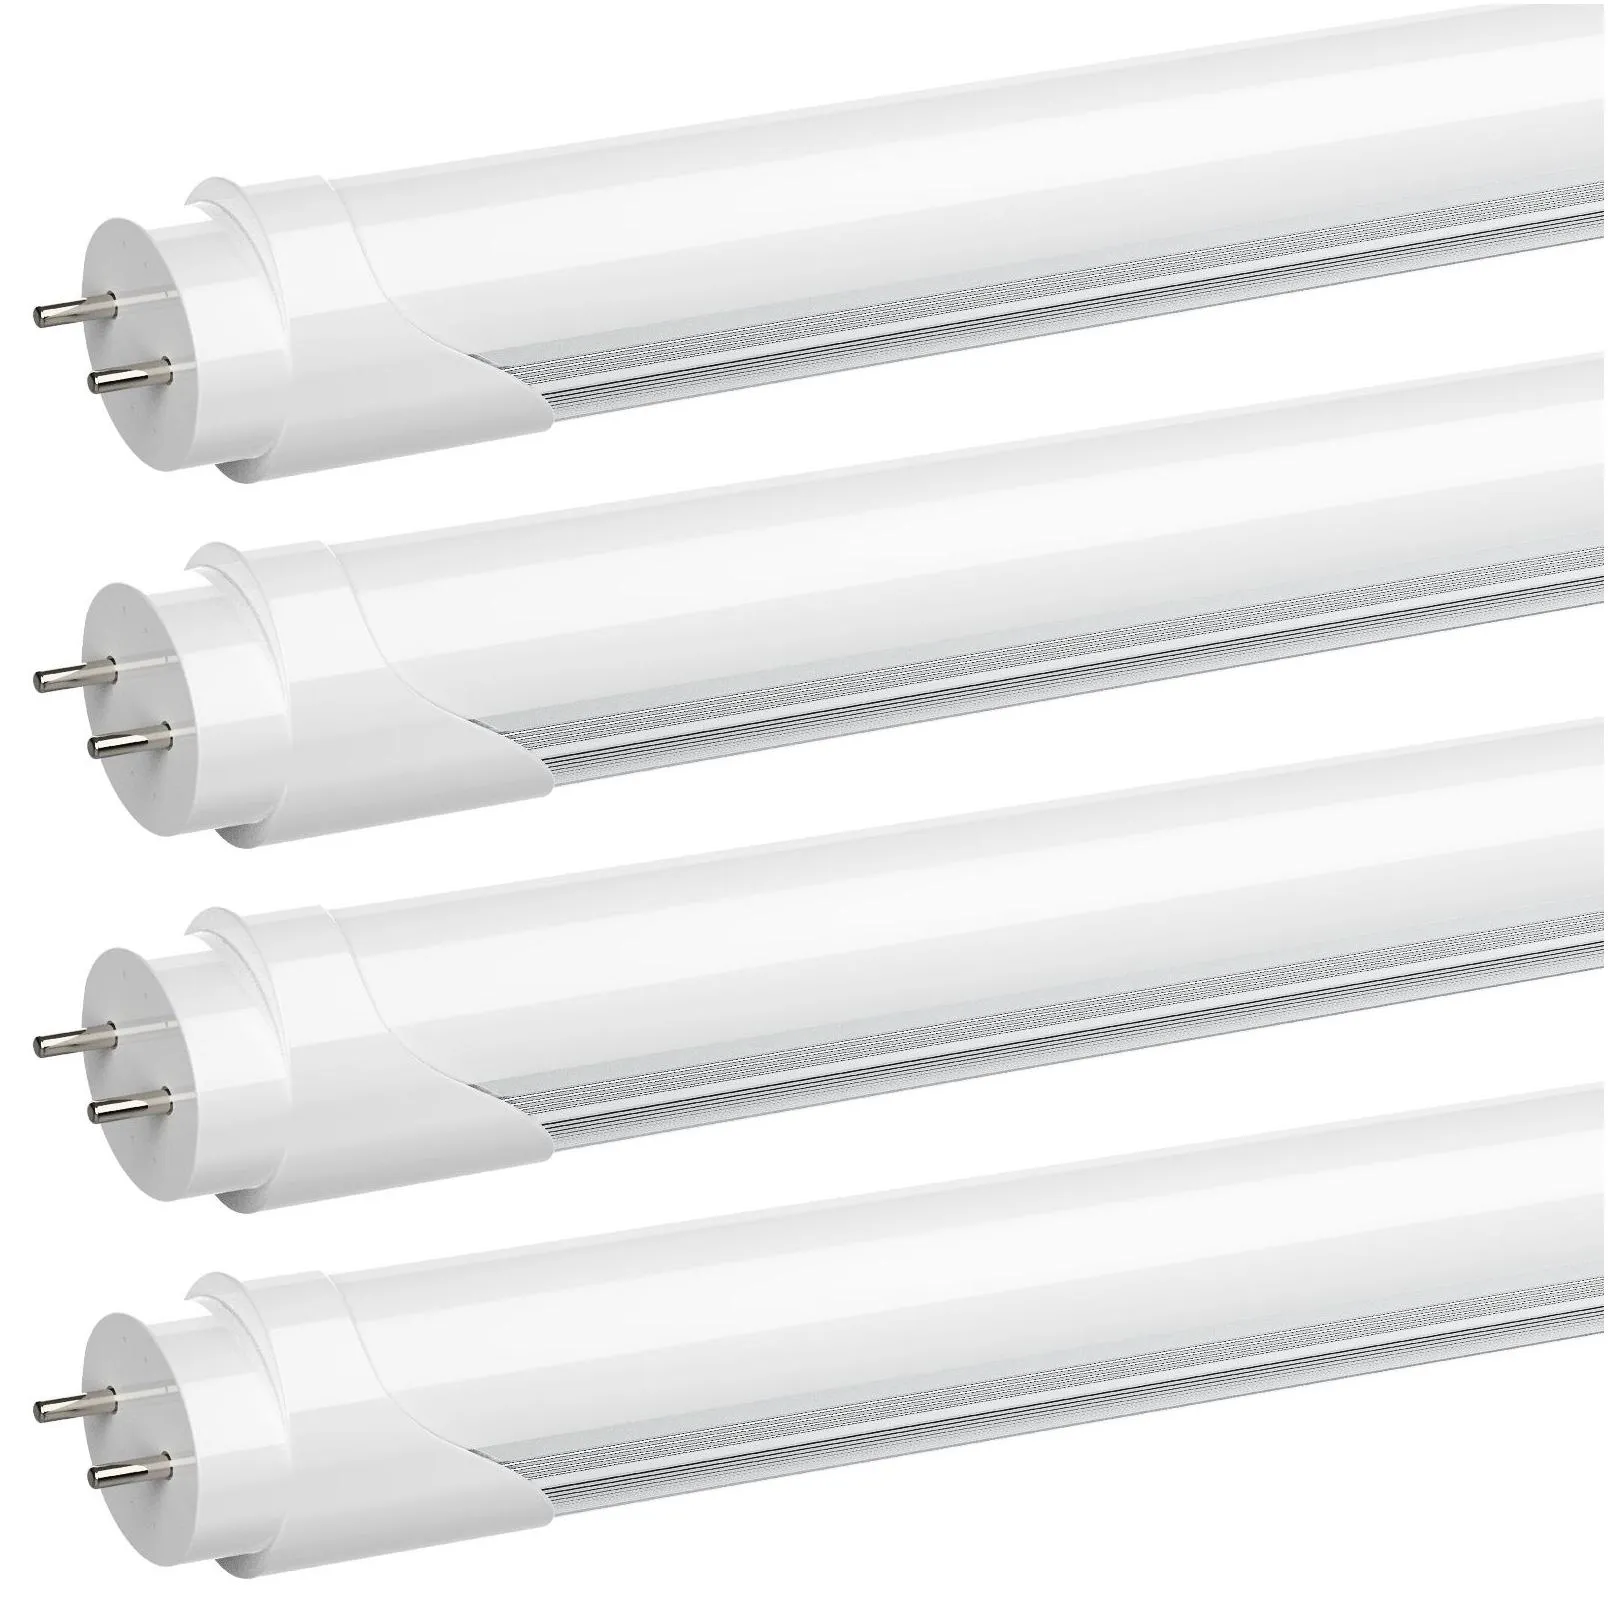 US STOCK 4ft 1.2m T8 Led Tube Lights High Super Bright 22W Warm / Cool White Led Fluorescent Tube Bulbs G13 Bi-pin AC 85-265V replacement for shop garage